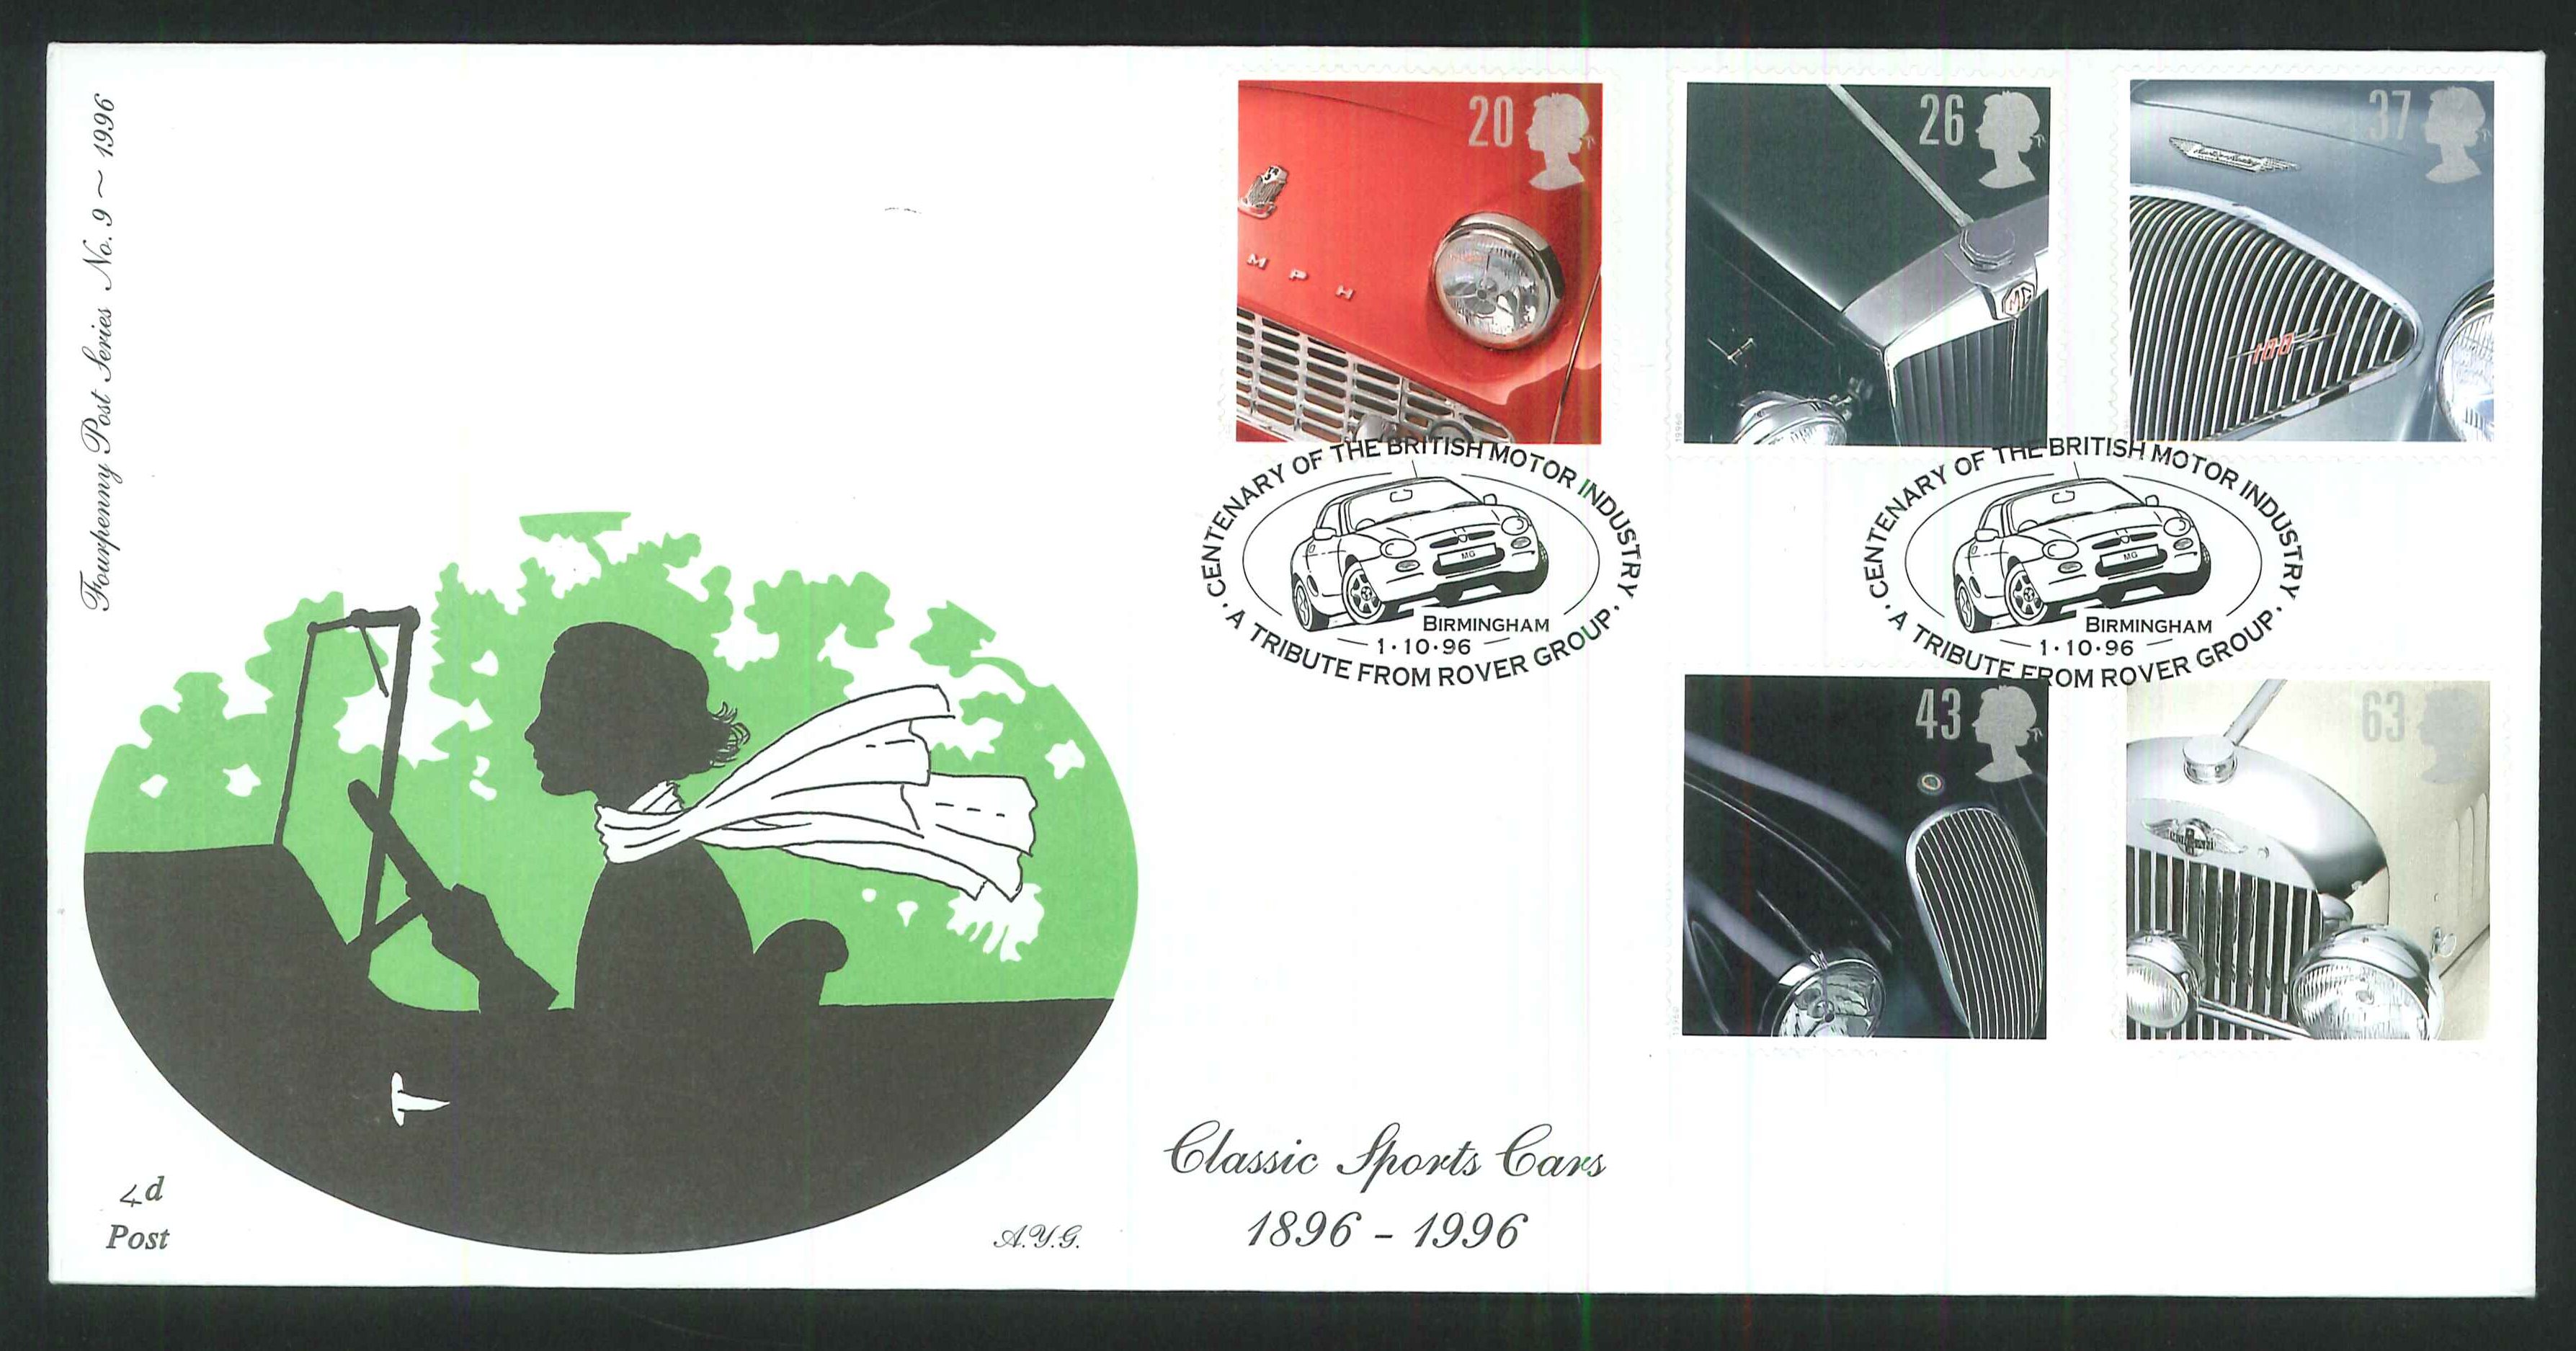 1996 - Classic Sports Cars 1896 - 1996, First Day Cover - Birmingham Postmark